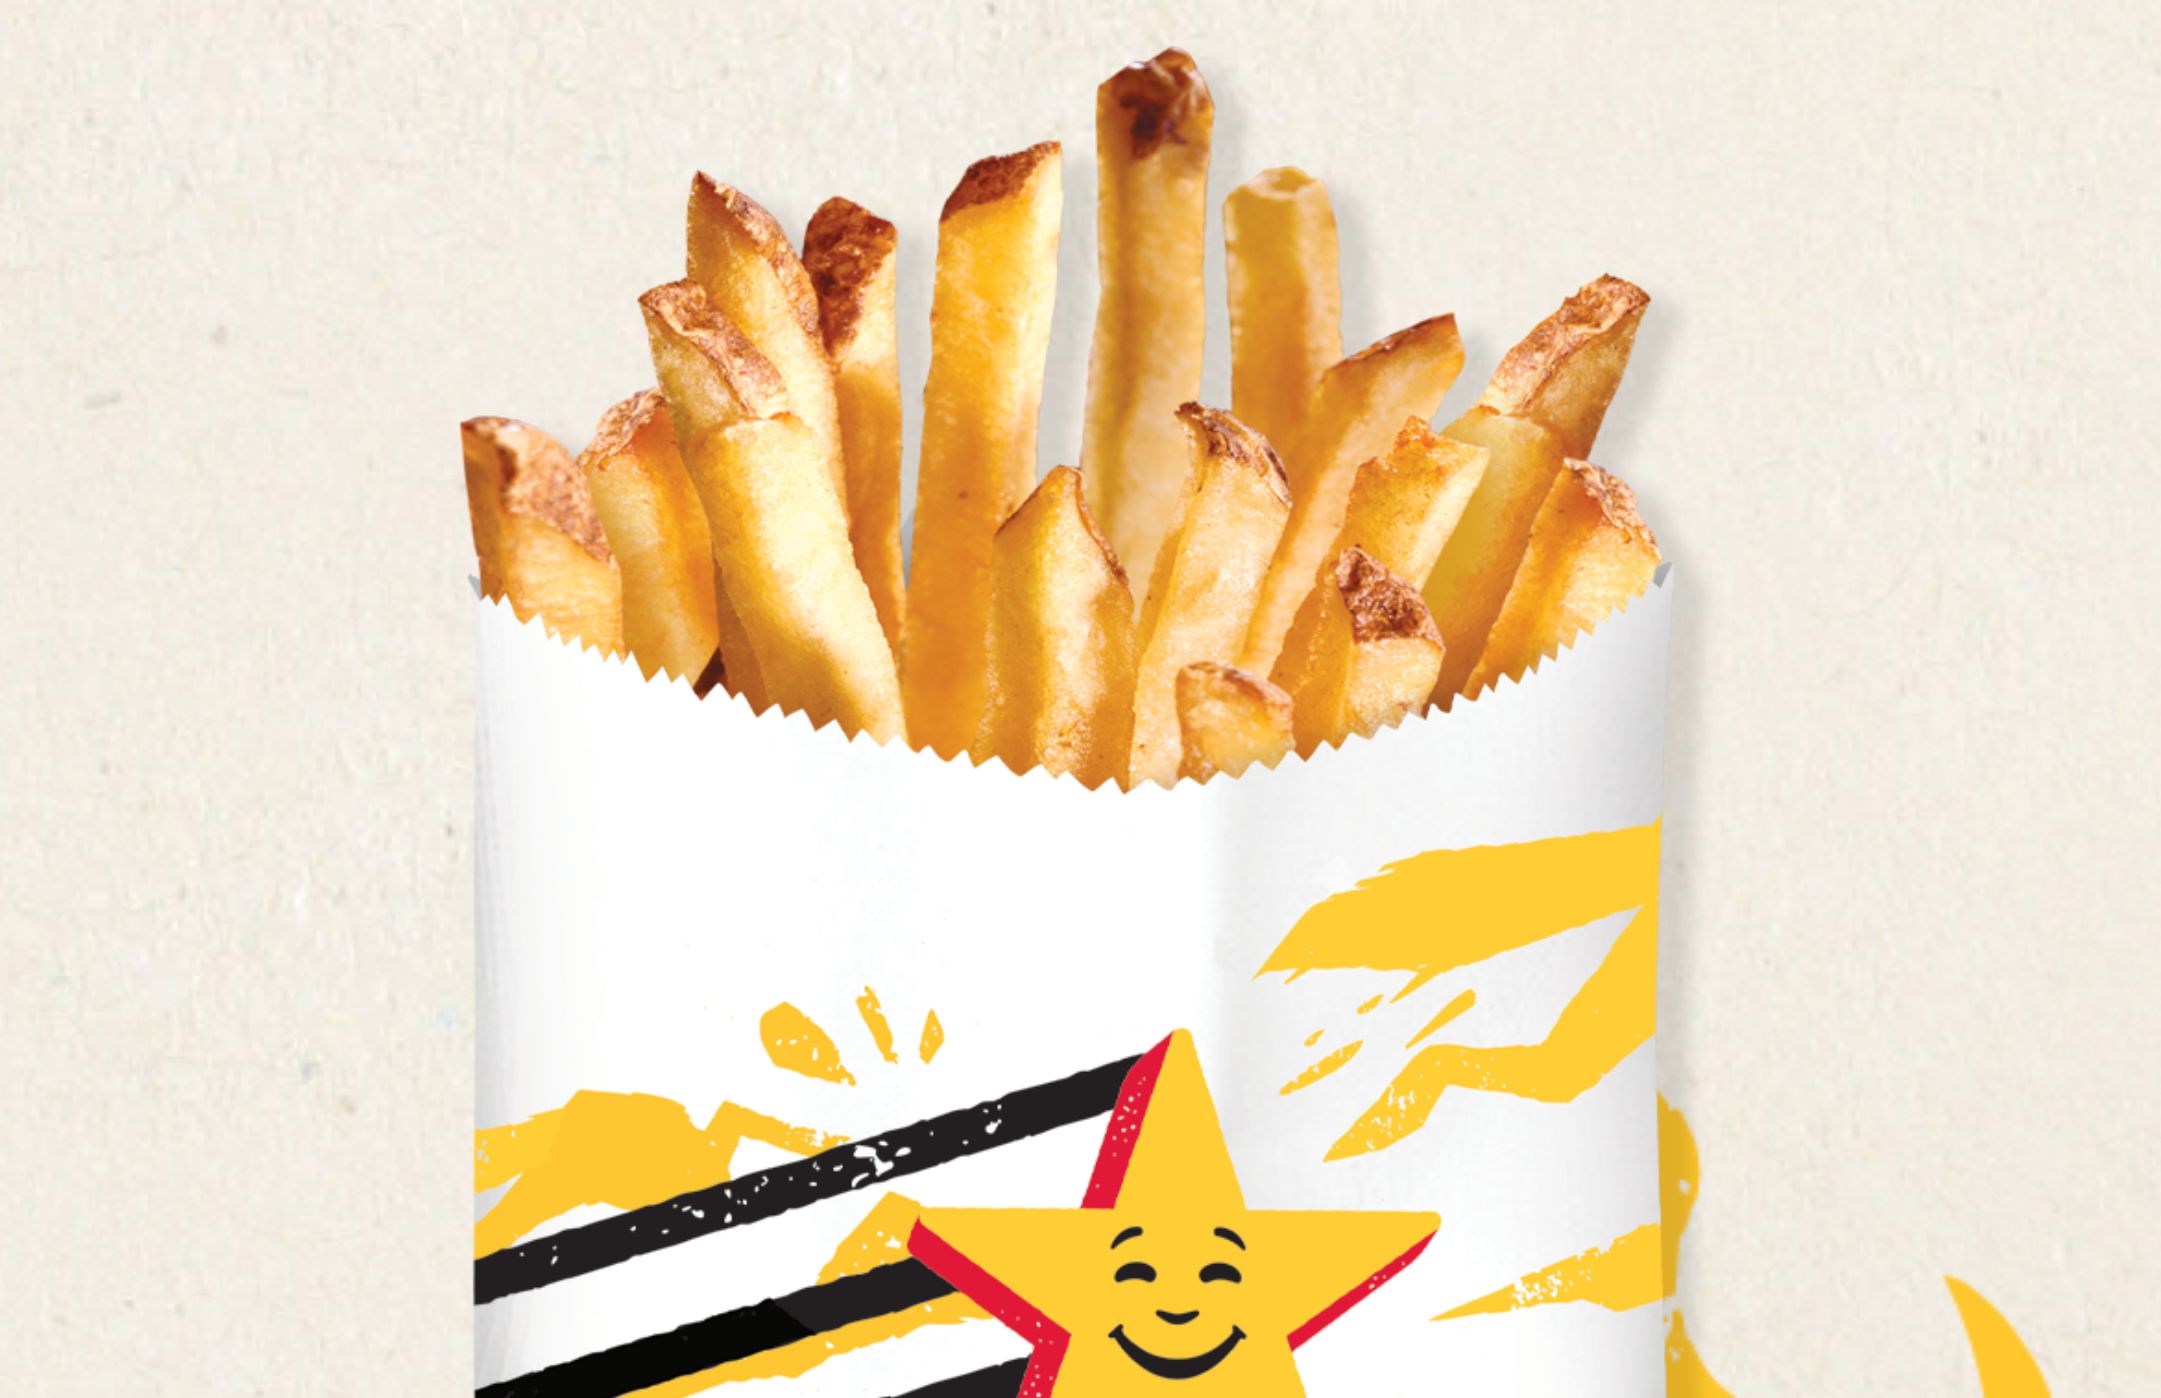 Enjoy Free Fries with Purchase During 2023 When You Buy Fries In-app on July 13 at Carl’s Jr.: A Rewards Exclusive 